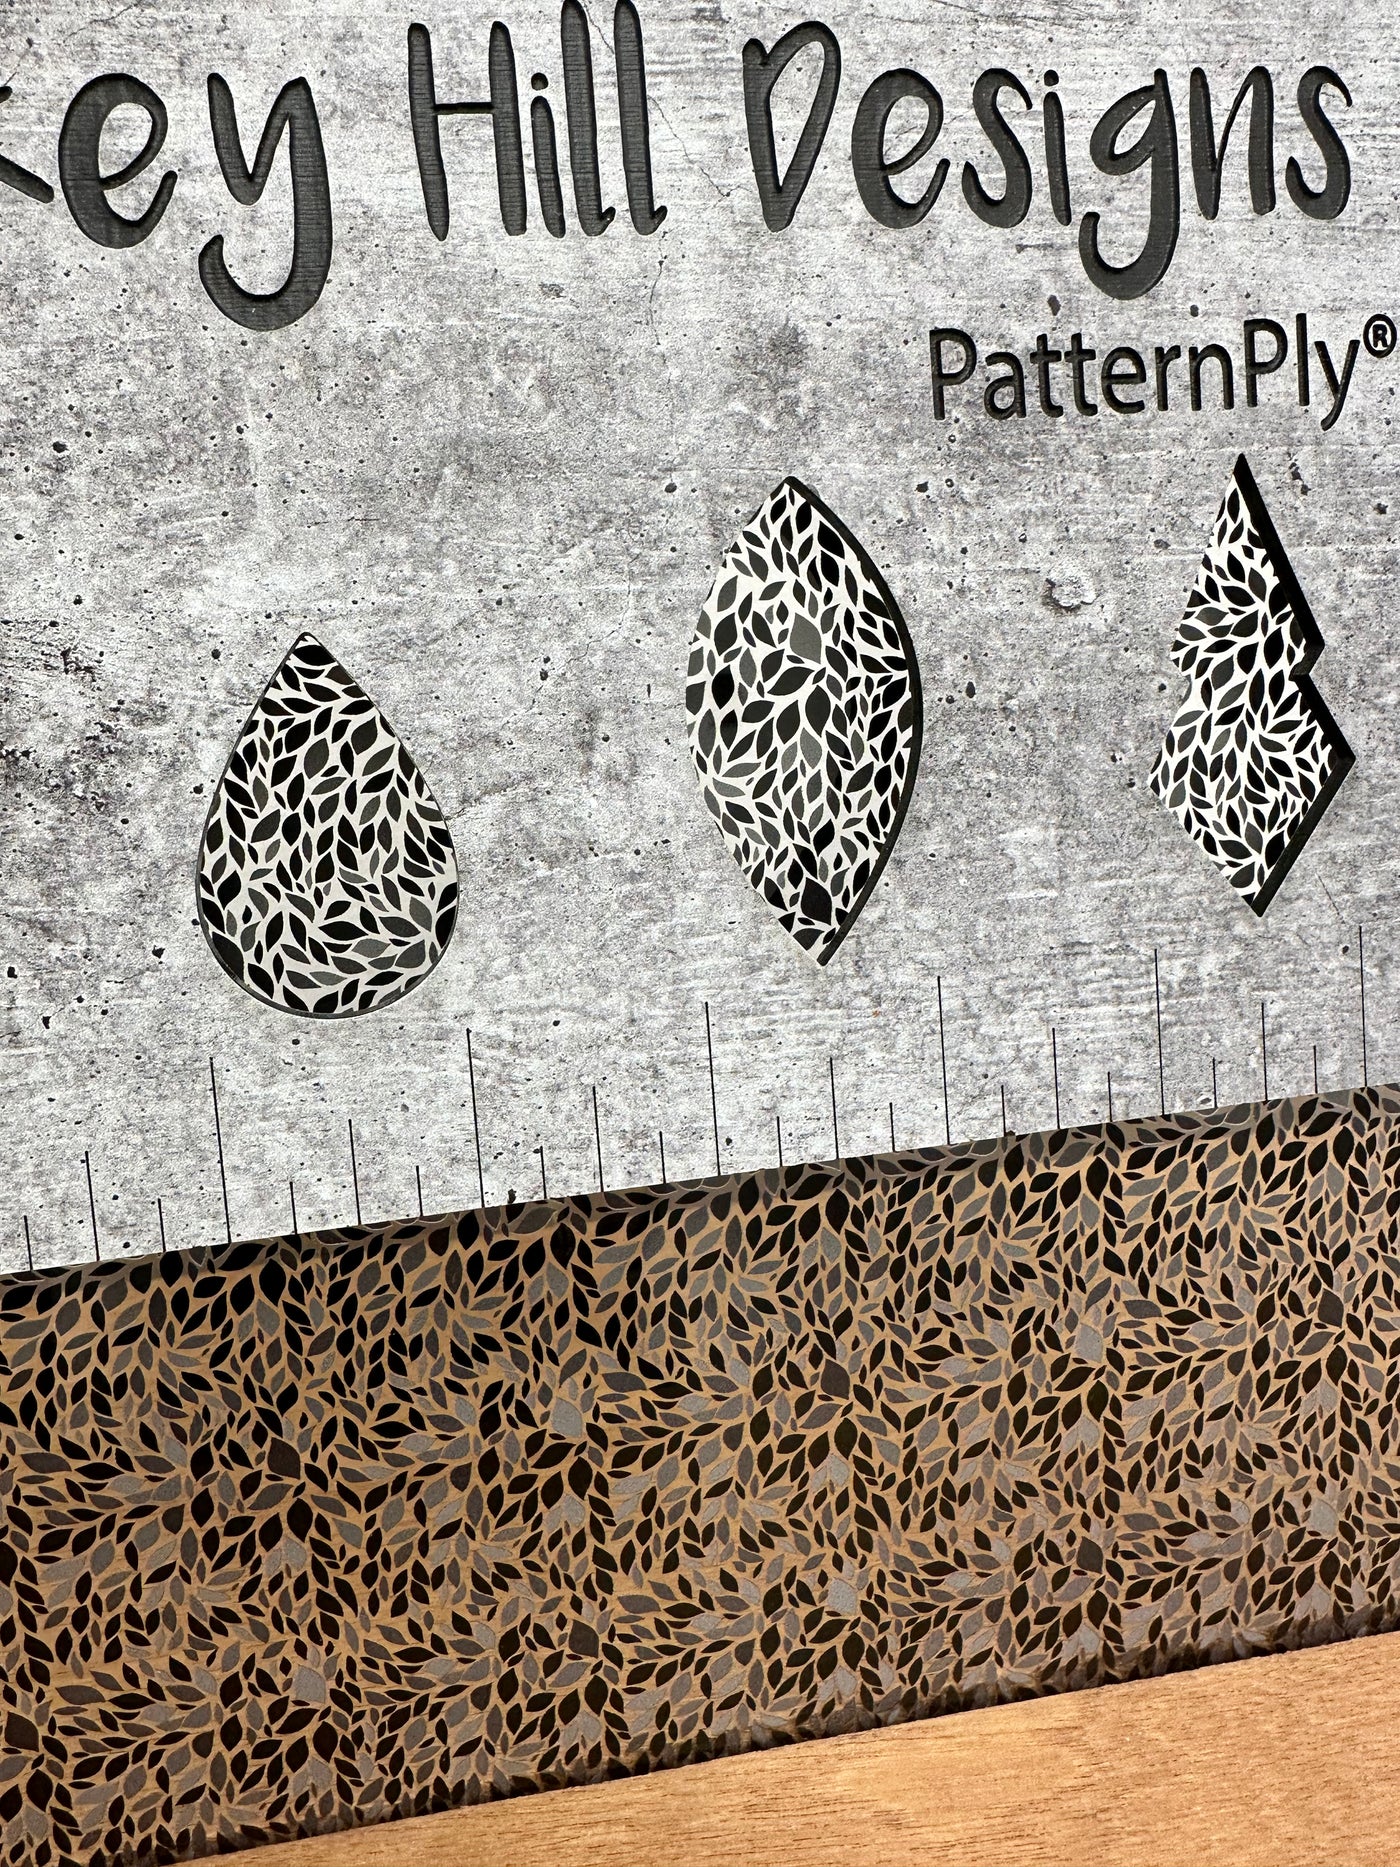 PatternPly® Scattered Grayscale Confetti